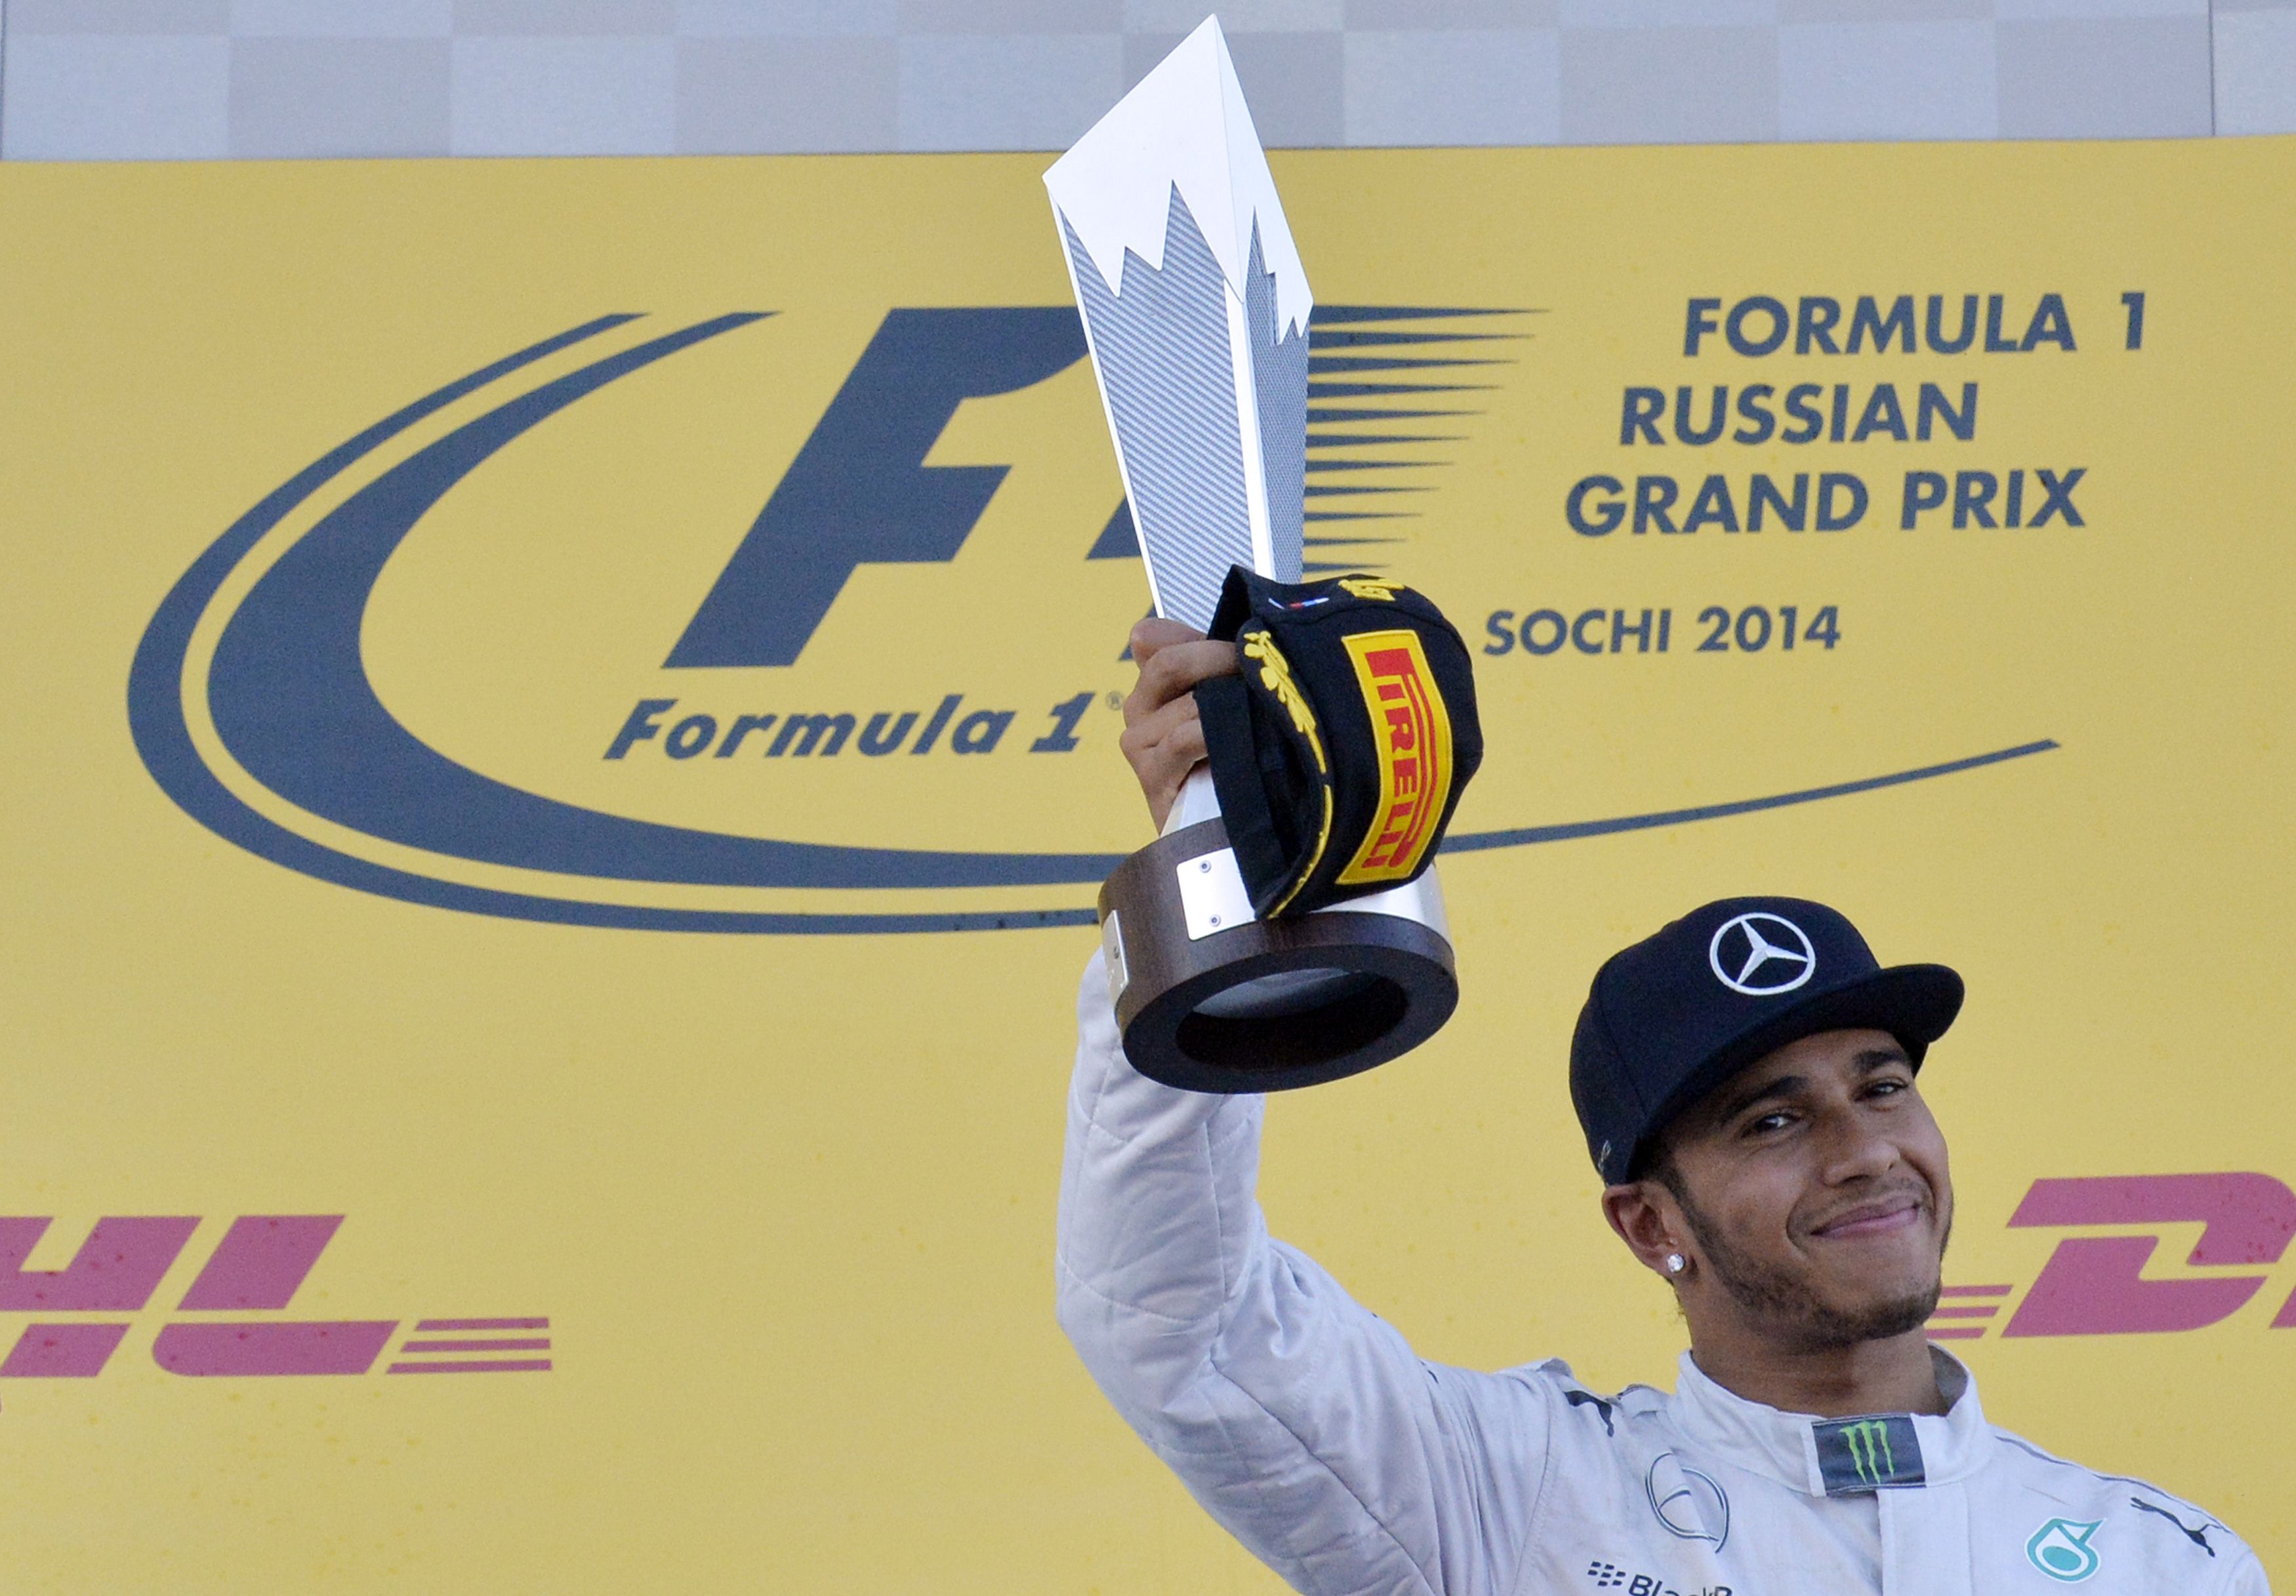 Mercedes' Lewis Hamilton raises his trophy after winning the inaugural Russian Formula 1 Grand Prix at the Sochi Autodrom. Photo: AFP